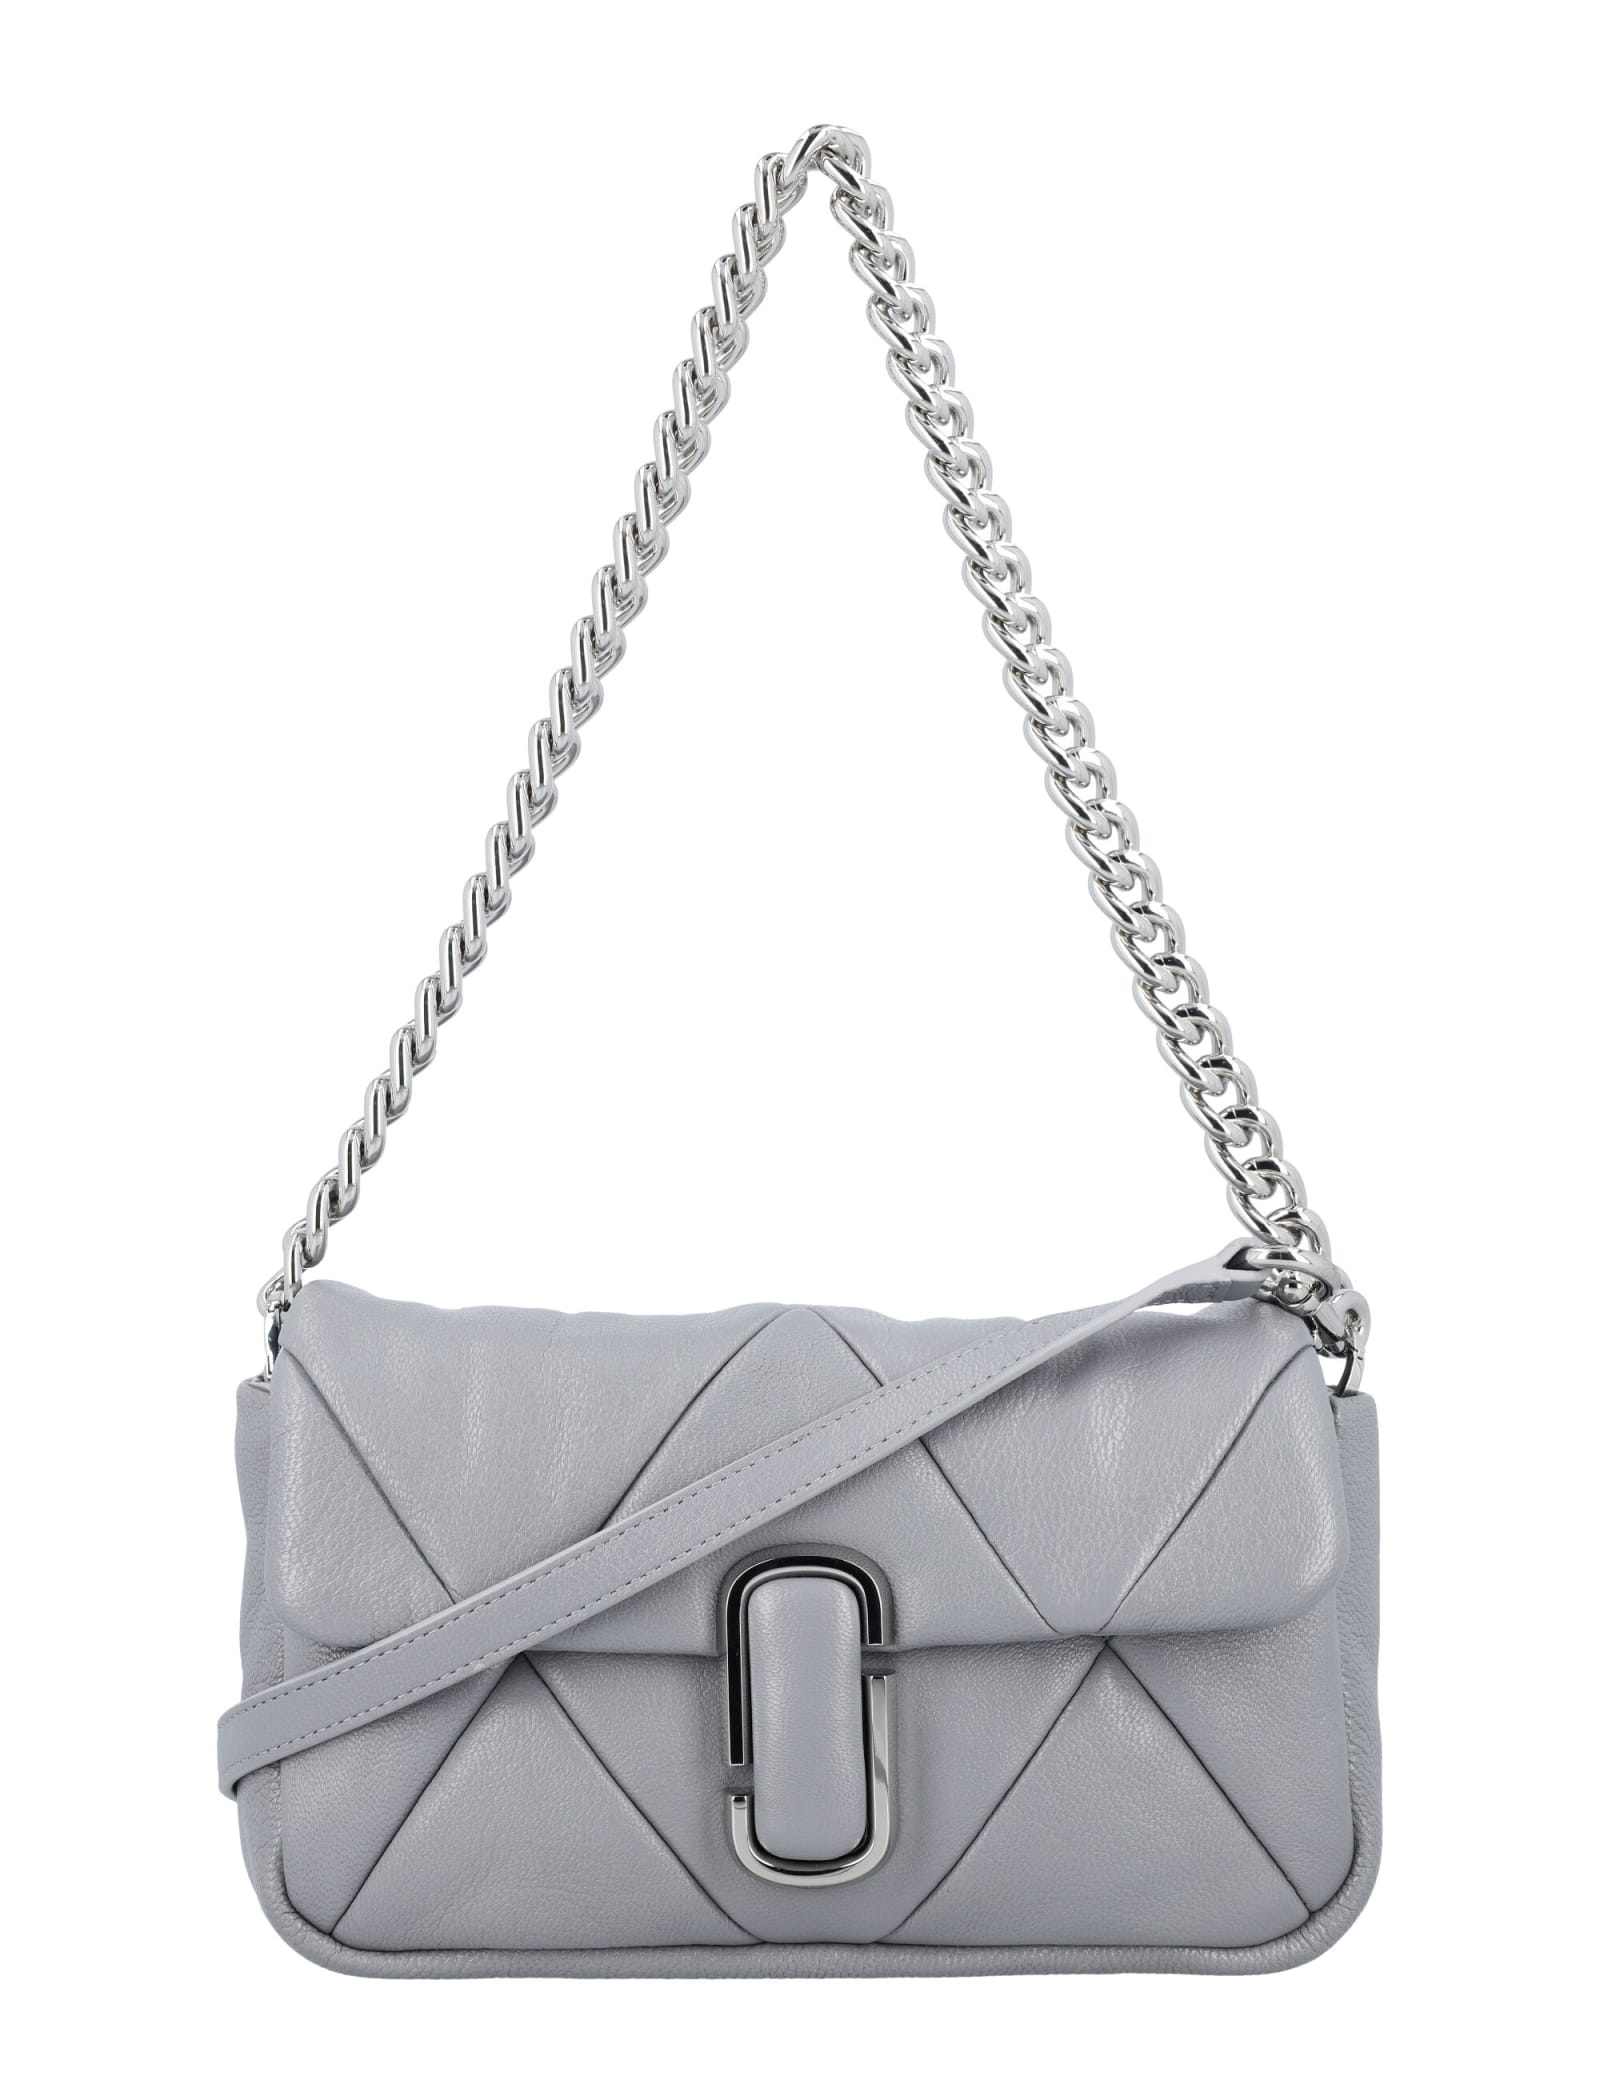 MARC JACOBS THE PUFFY DIAMOND QUILTED J MARC SHOILDER BAG